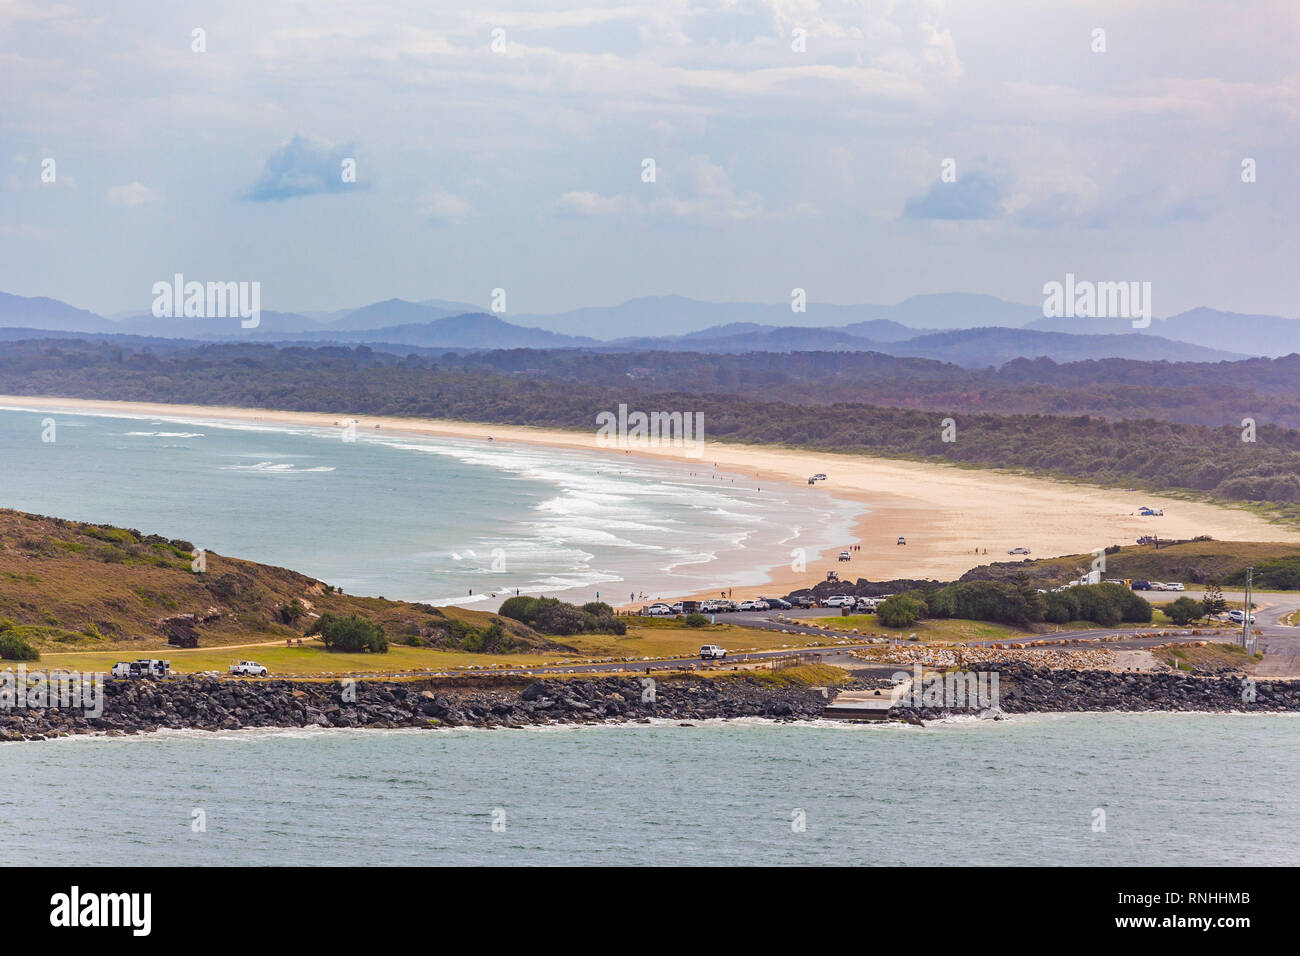 Cars driving on Gallows Beach at Coffs Harbour, New South Wales, Australia Stock Photo